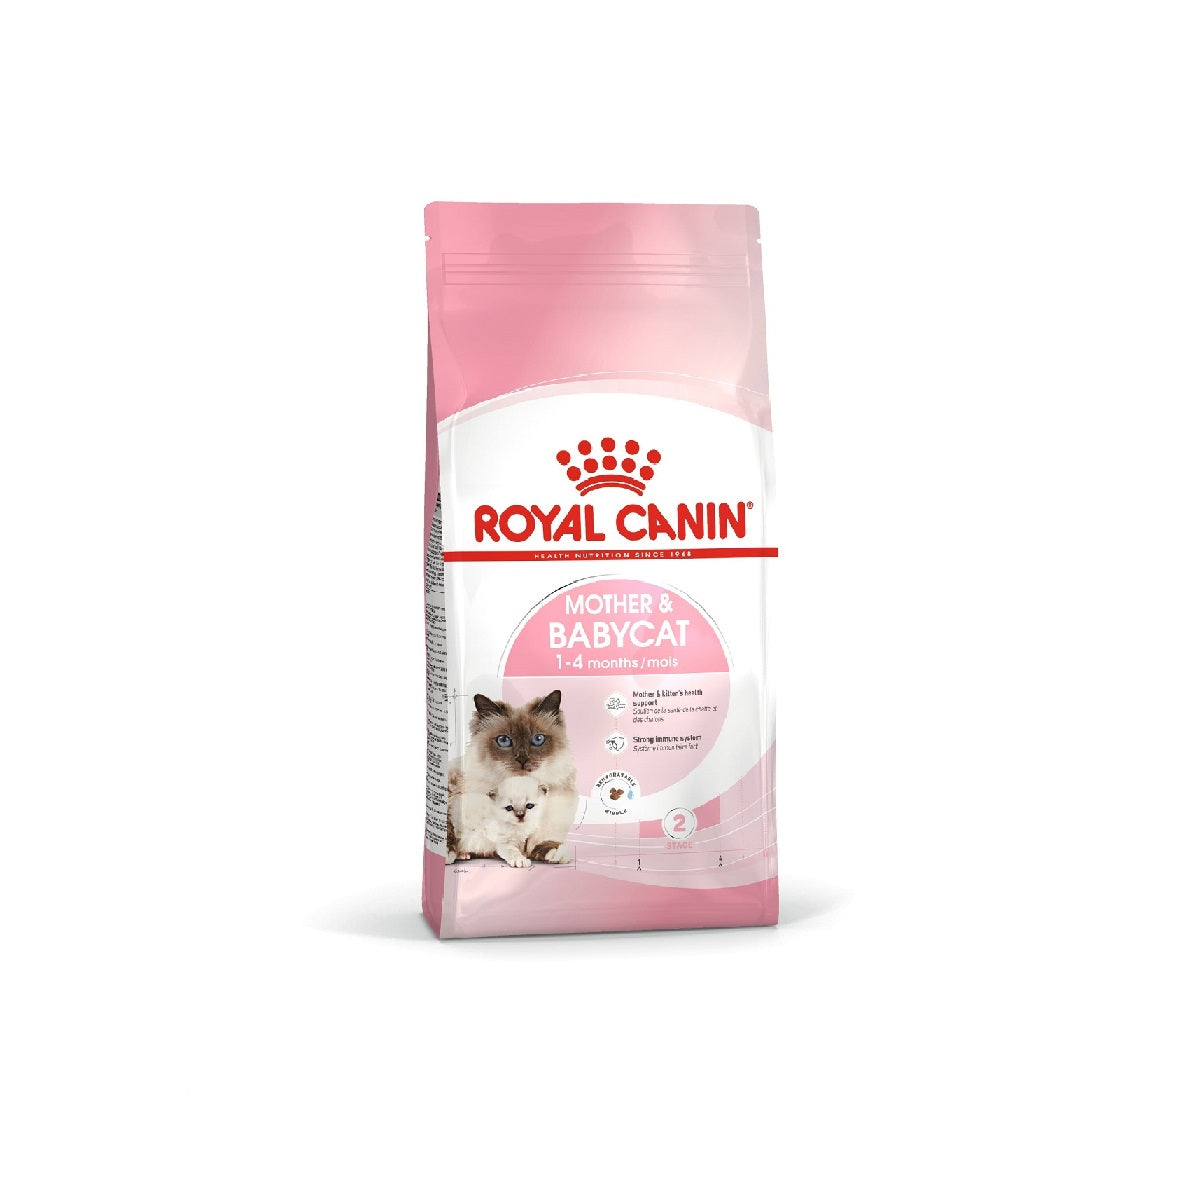 ROYAL CANIN - Mother & Babycat